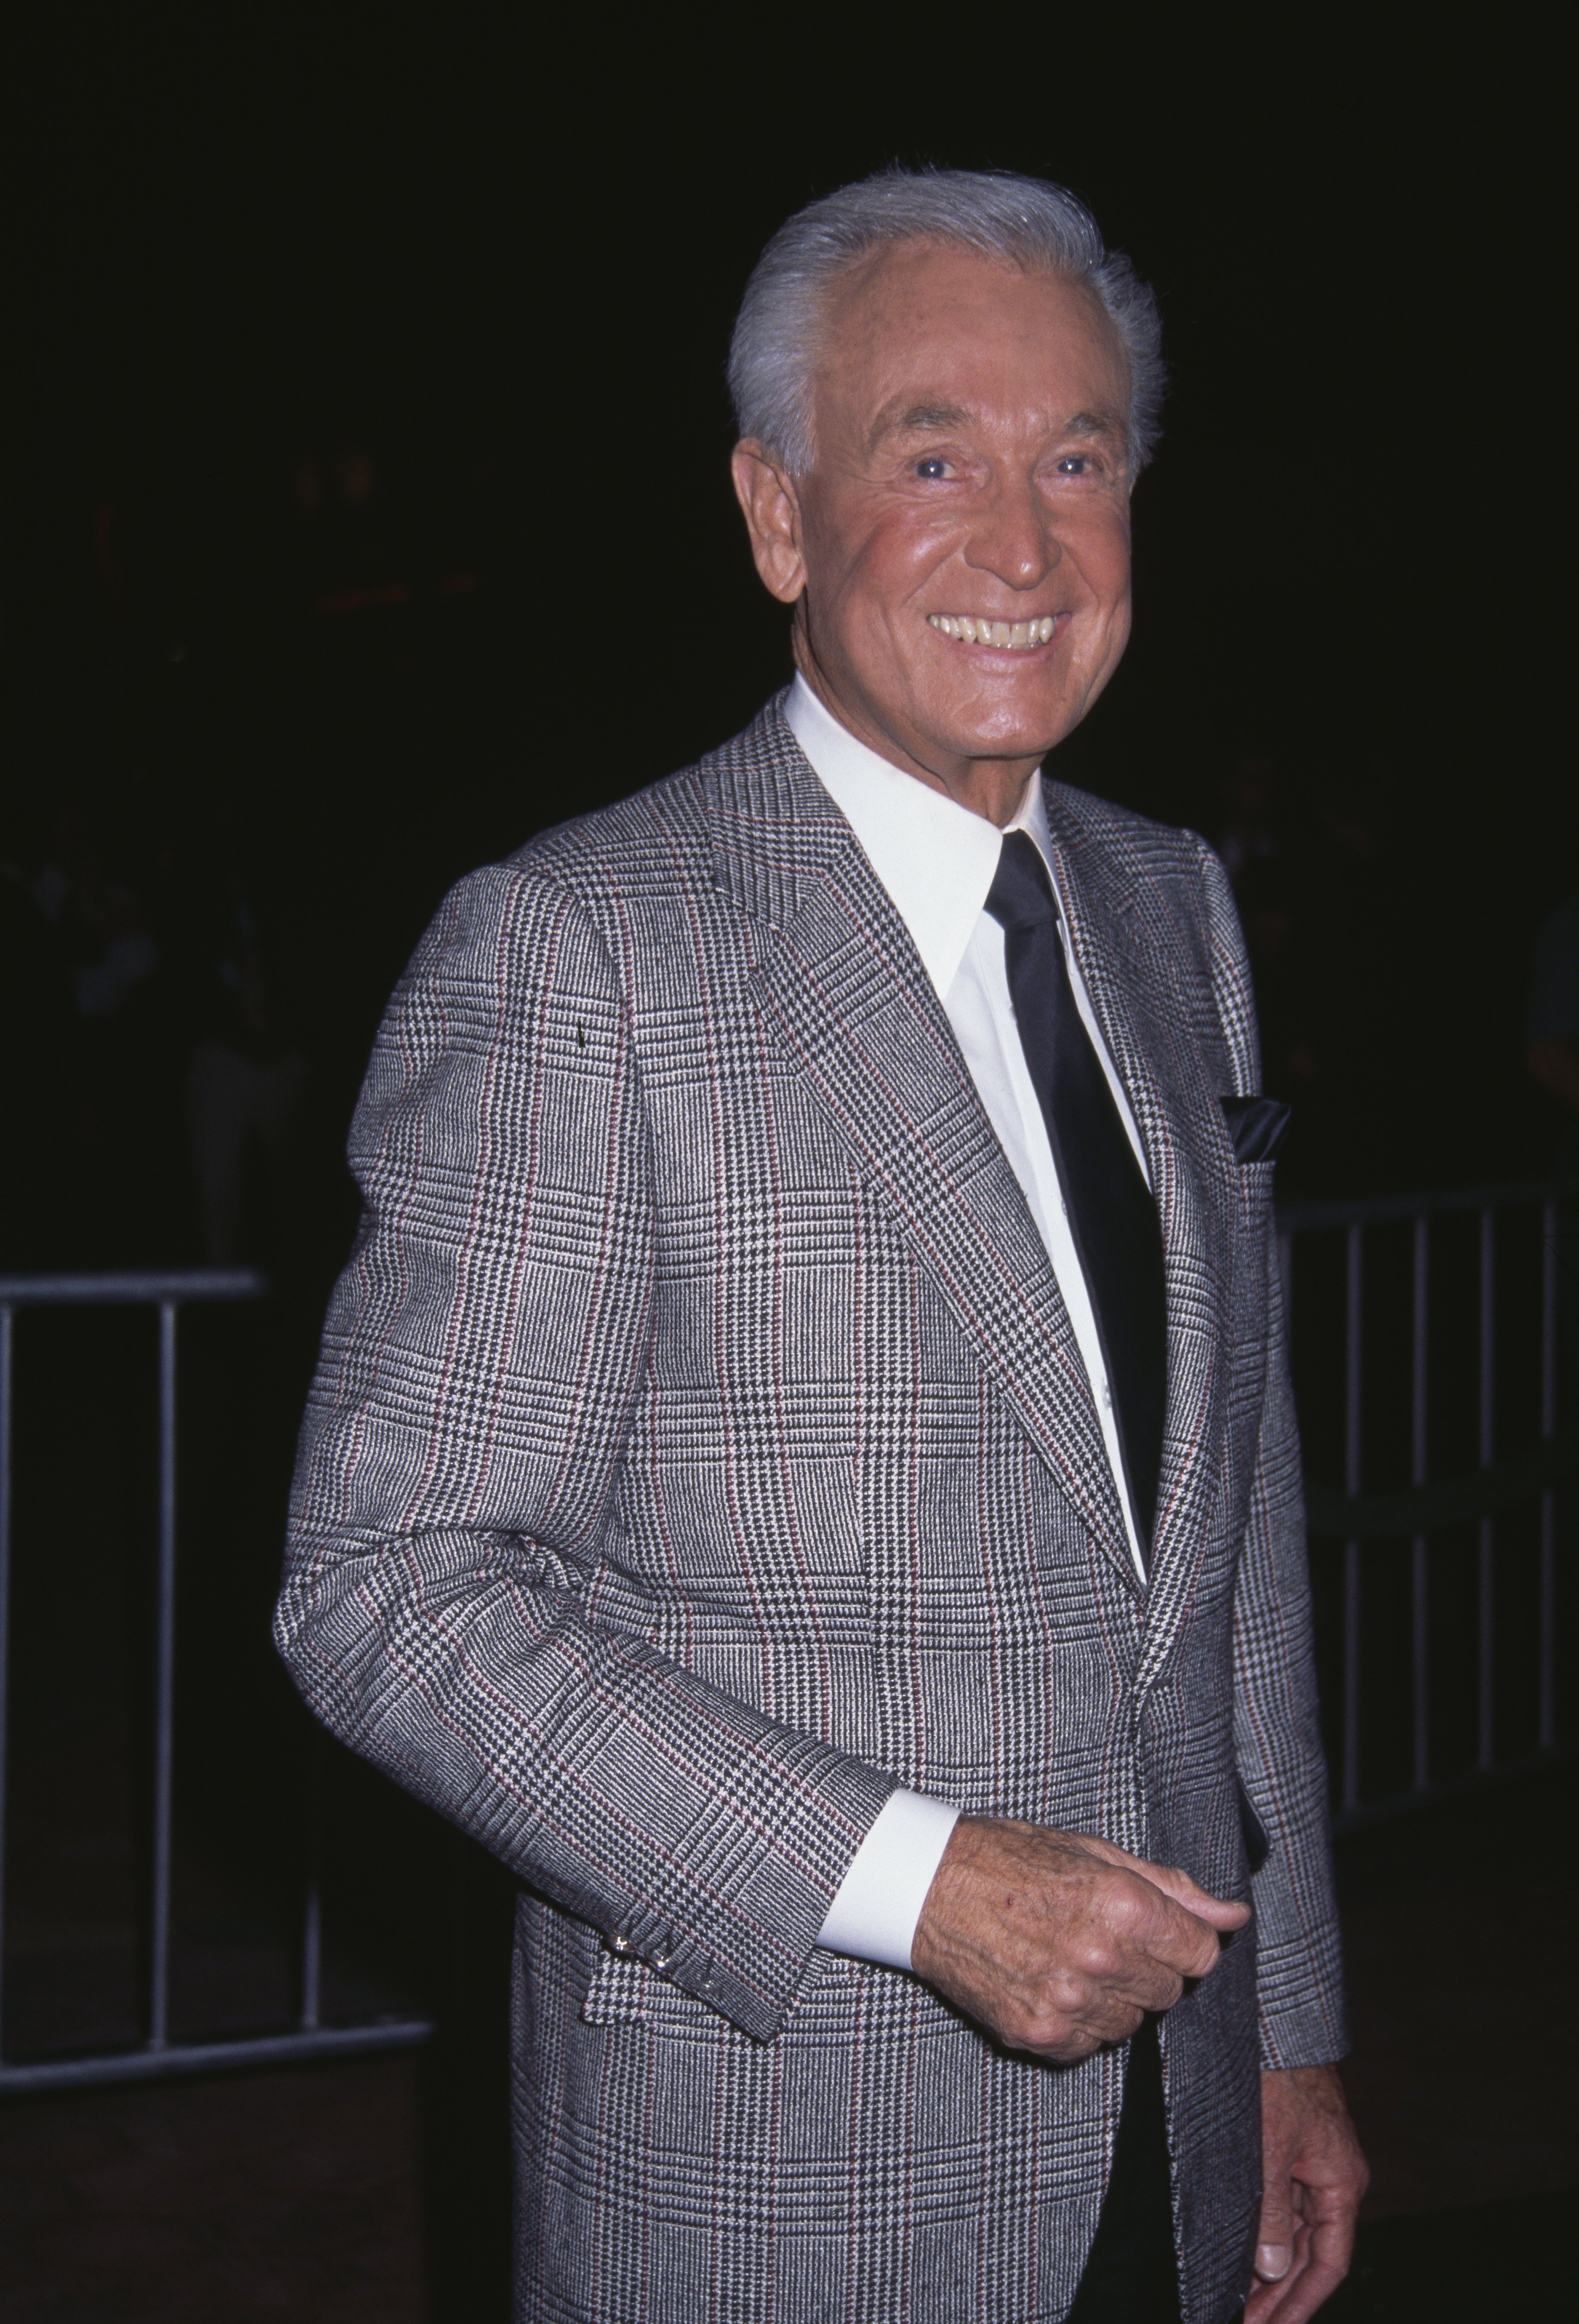 American television game show host Bob Barker attends the premiere of "Happy Gilmore" at the Cineplex Odeon Cinema in Century City, California, US, on February 7, 1996. | Source: Getty Images